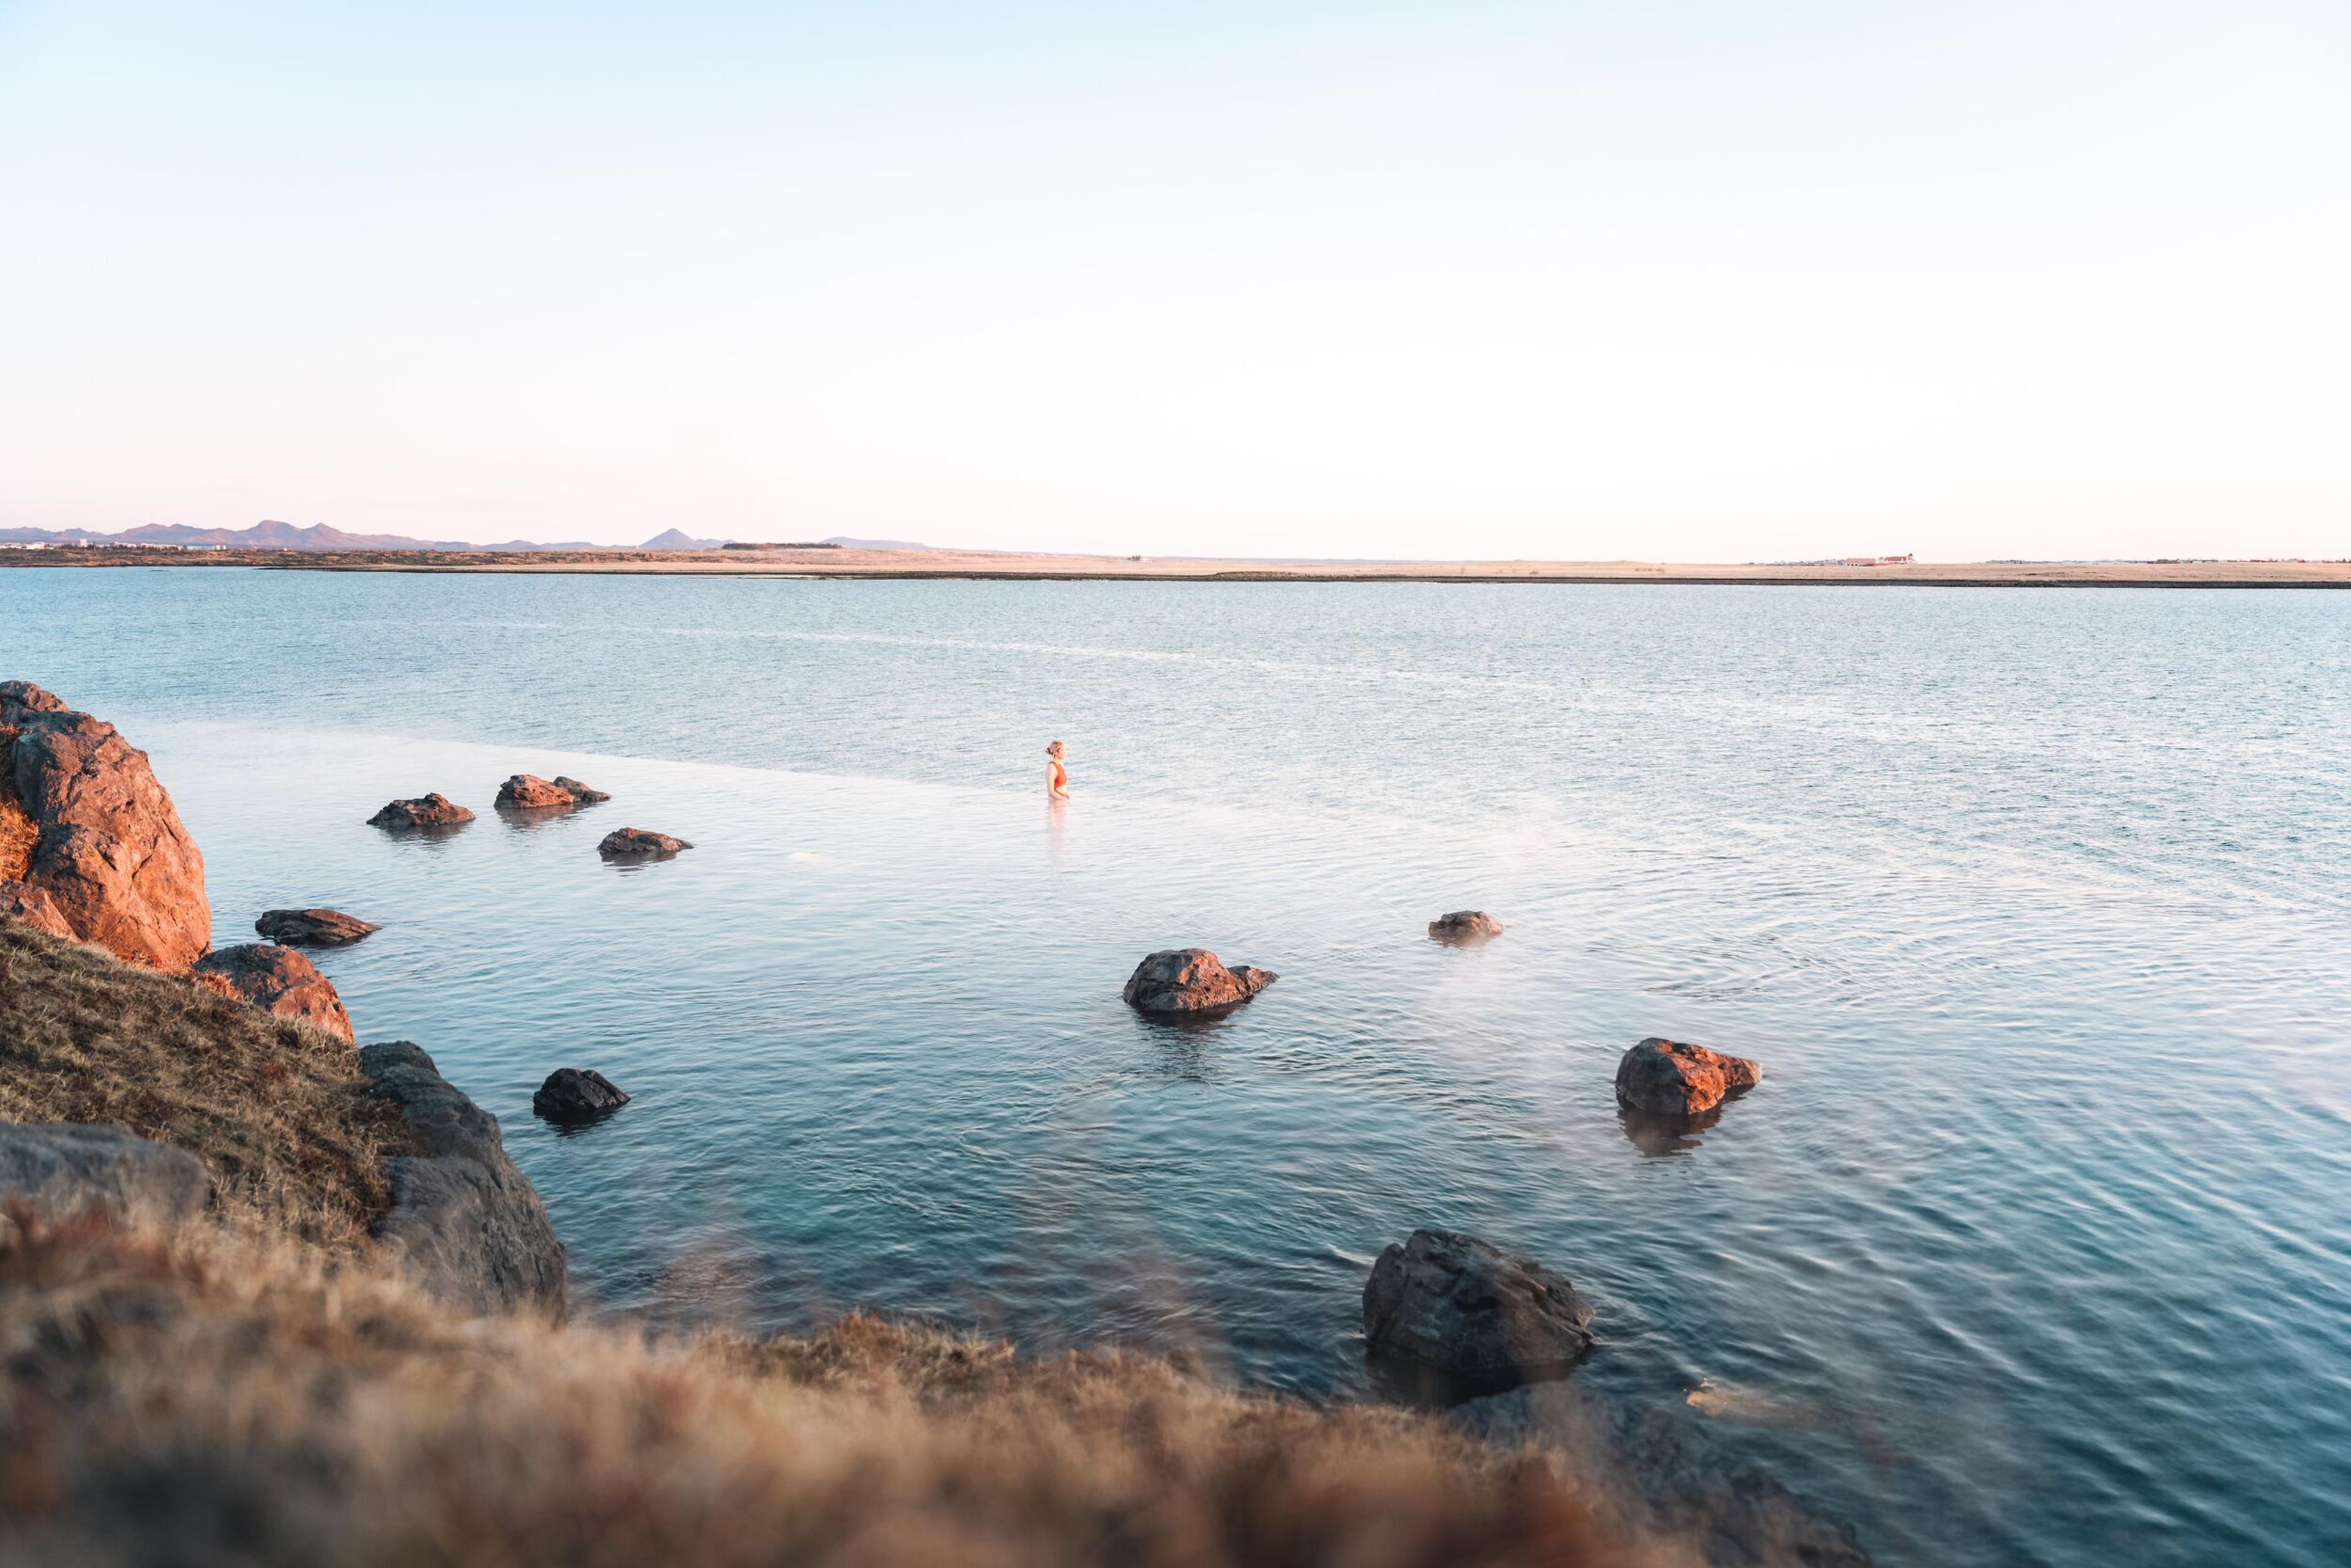 A solitary figure stands in the calm, expansive waters of Sky Lagoon, surrounded by dark rocks and the vast landscape of Iceland, under a pastel sky.